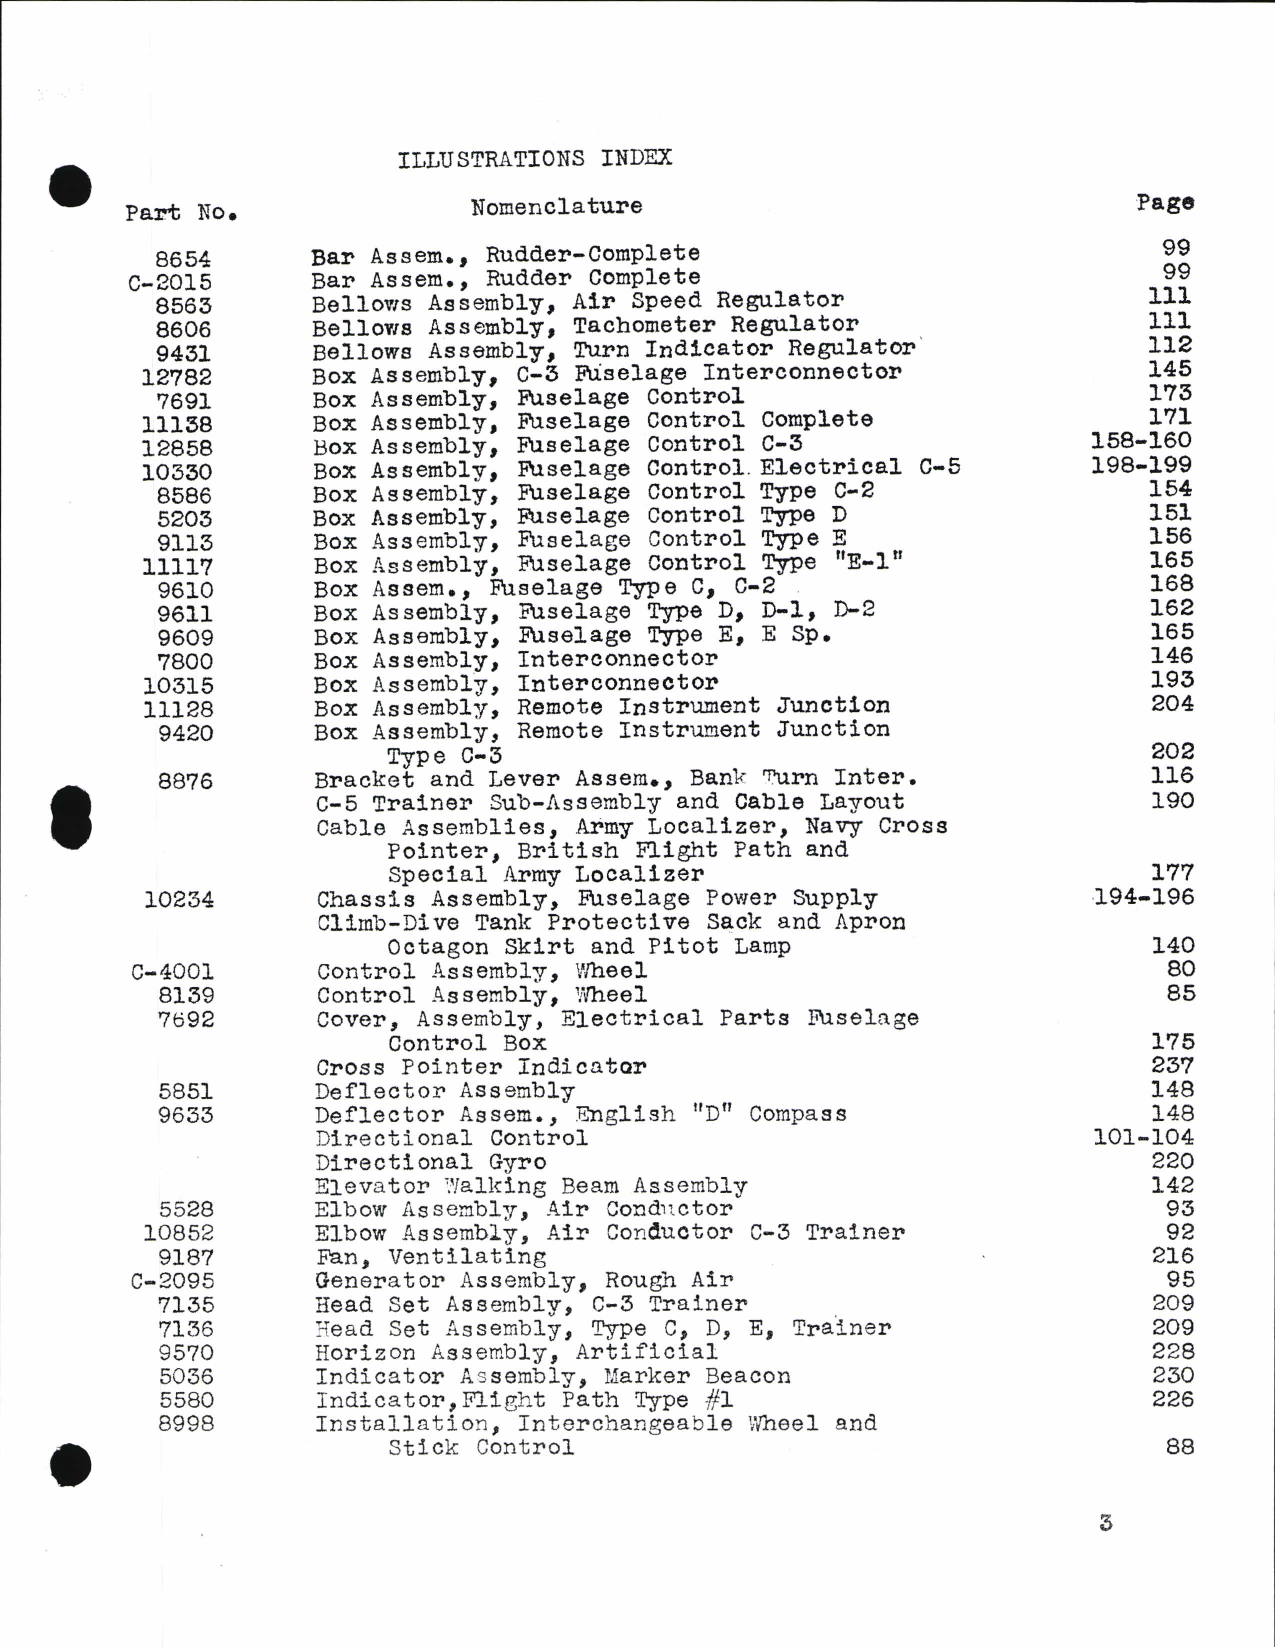 Sample page 7 from AirCorps Library document: Illustrated Parts Catalog for Link Instrument Flying Trainers